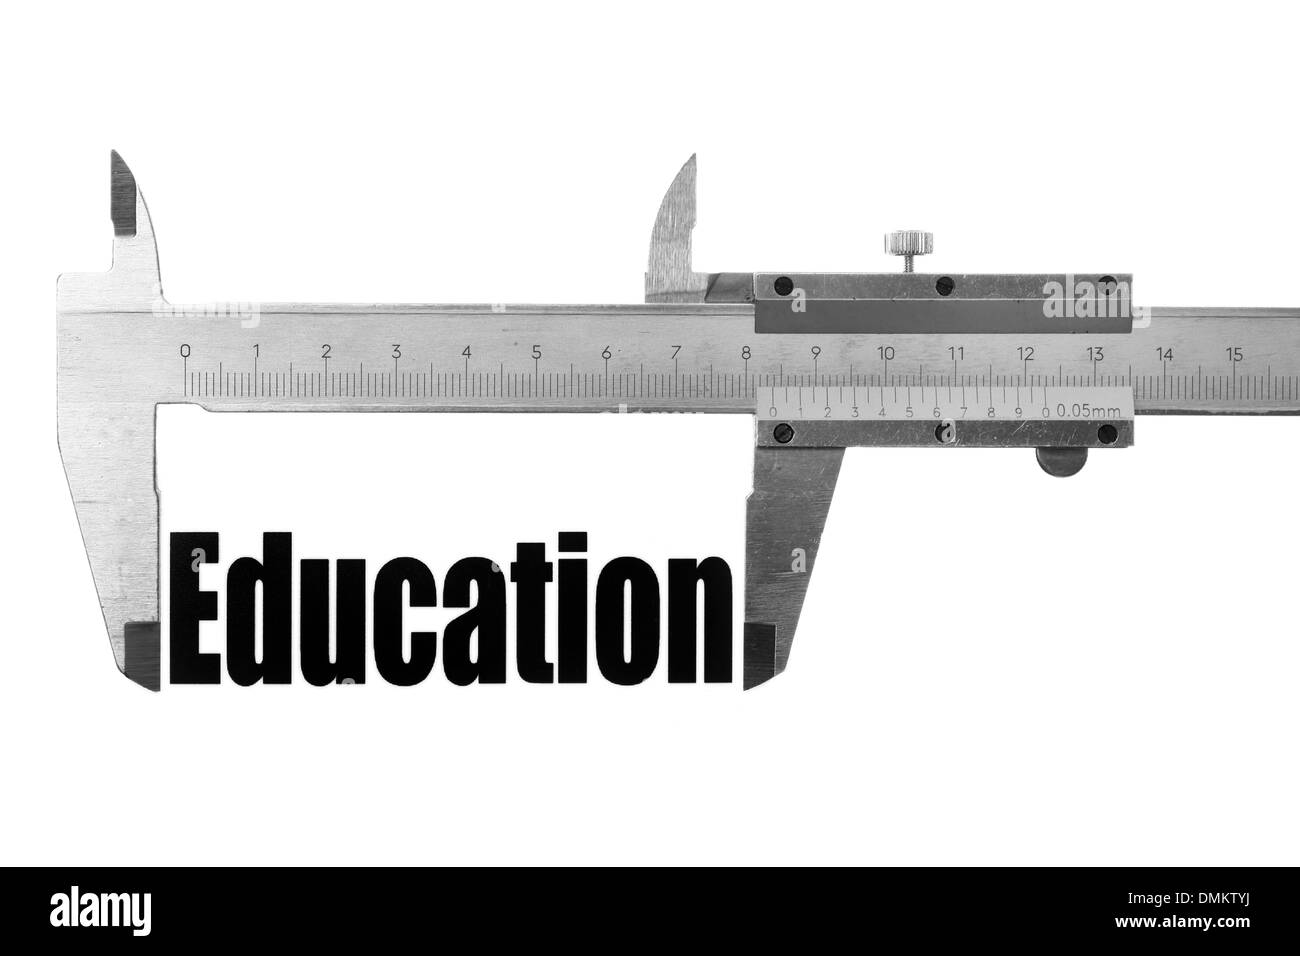 Picture of a caliper measuring the word 'Education'. Stock Photo